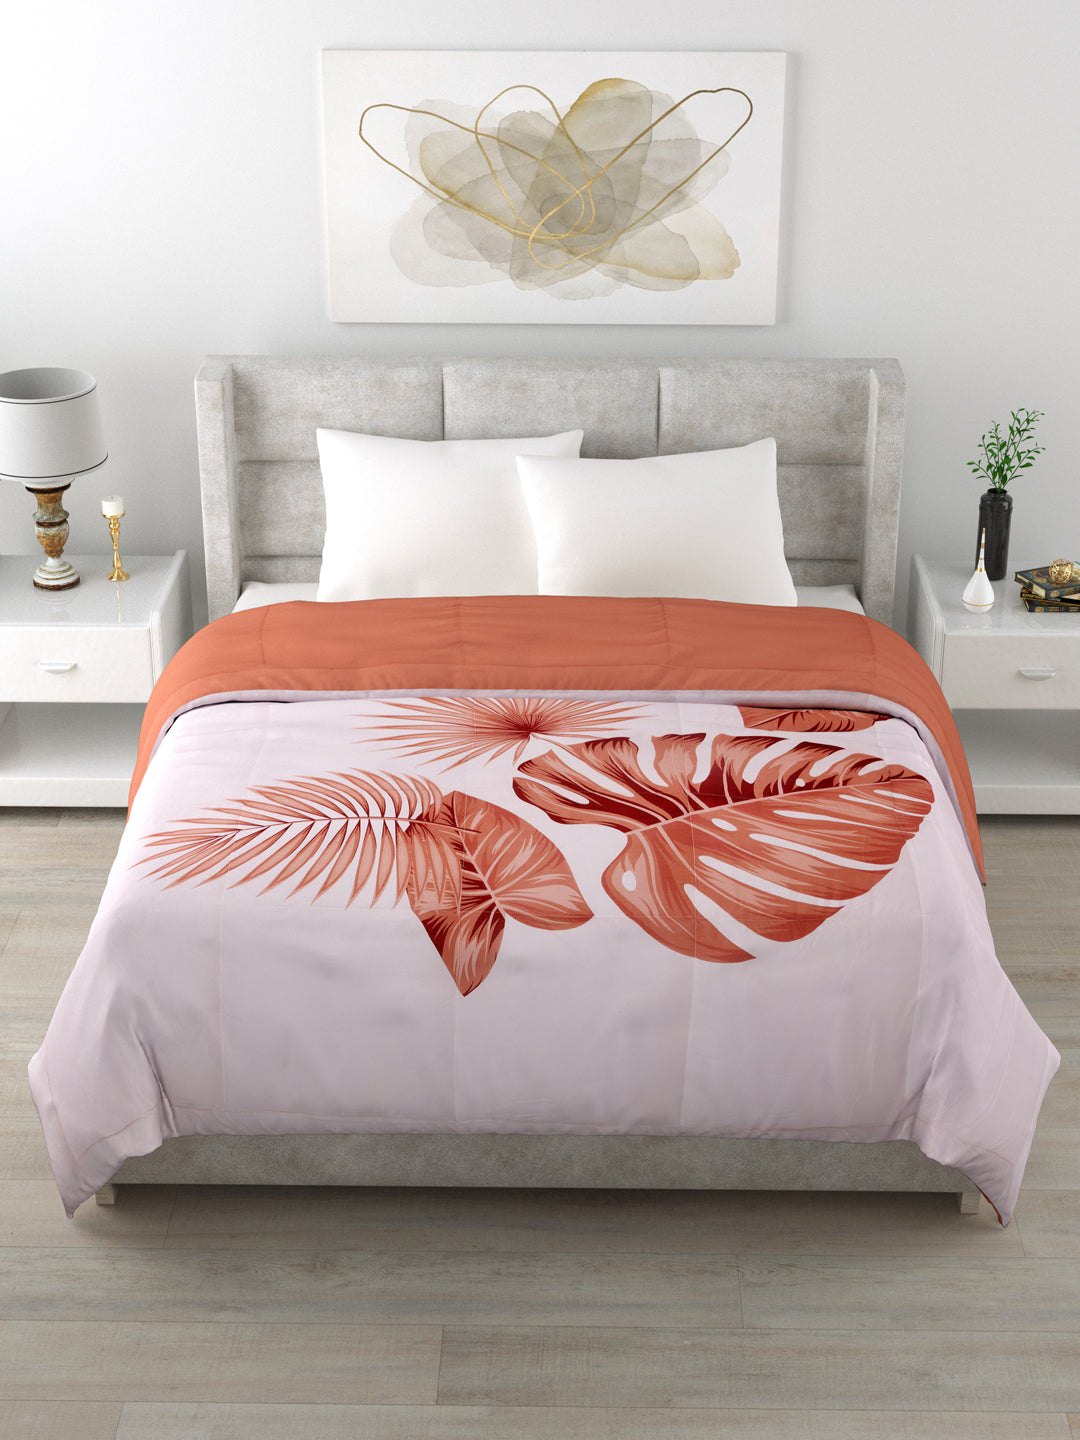 Reversible King Size Comforter 220 GSM; 90x100 Inches; Orange Leaves On Pink